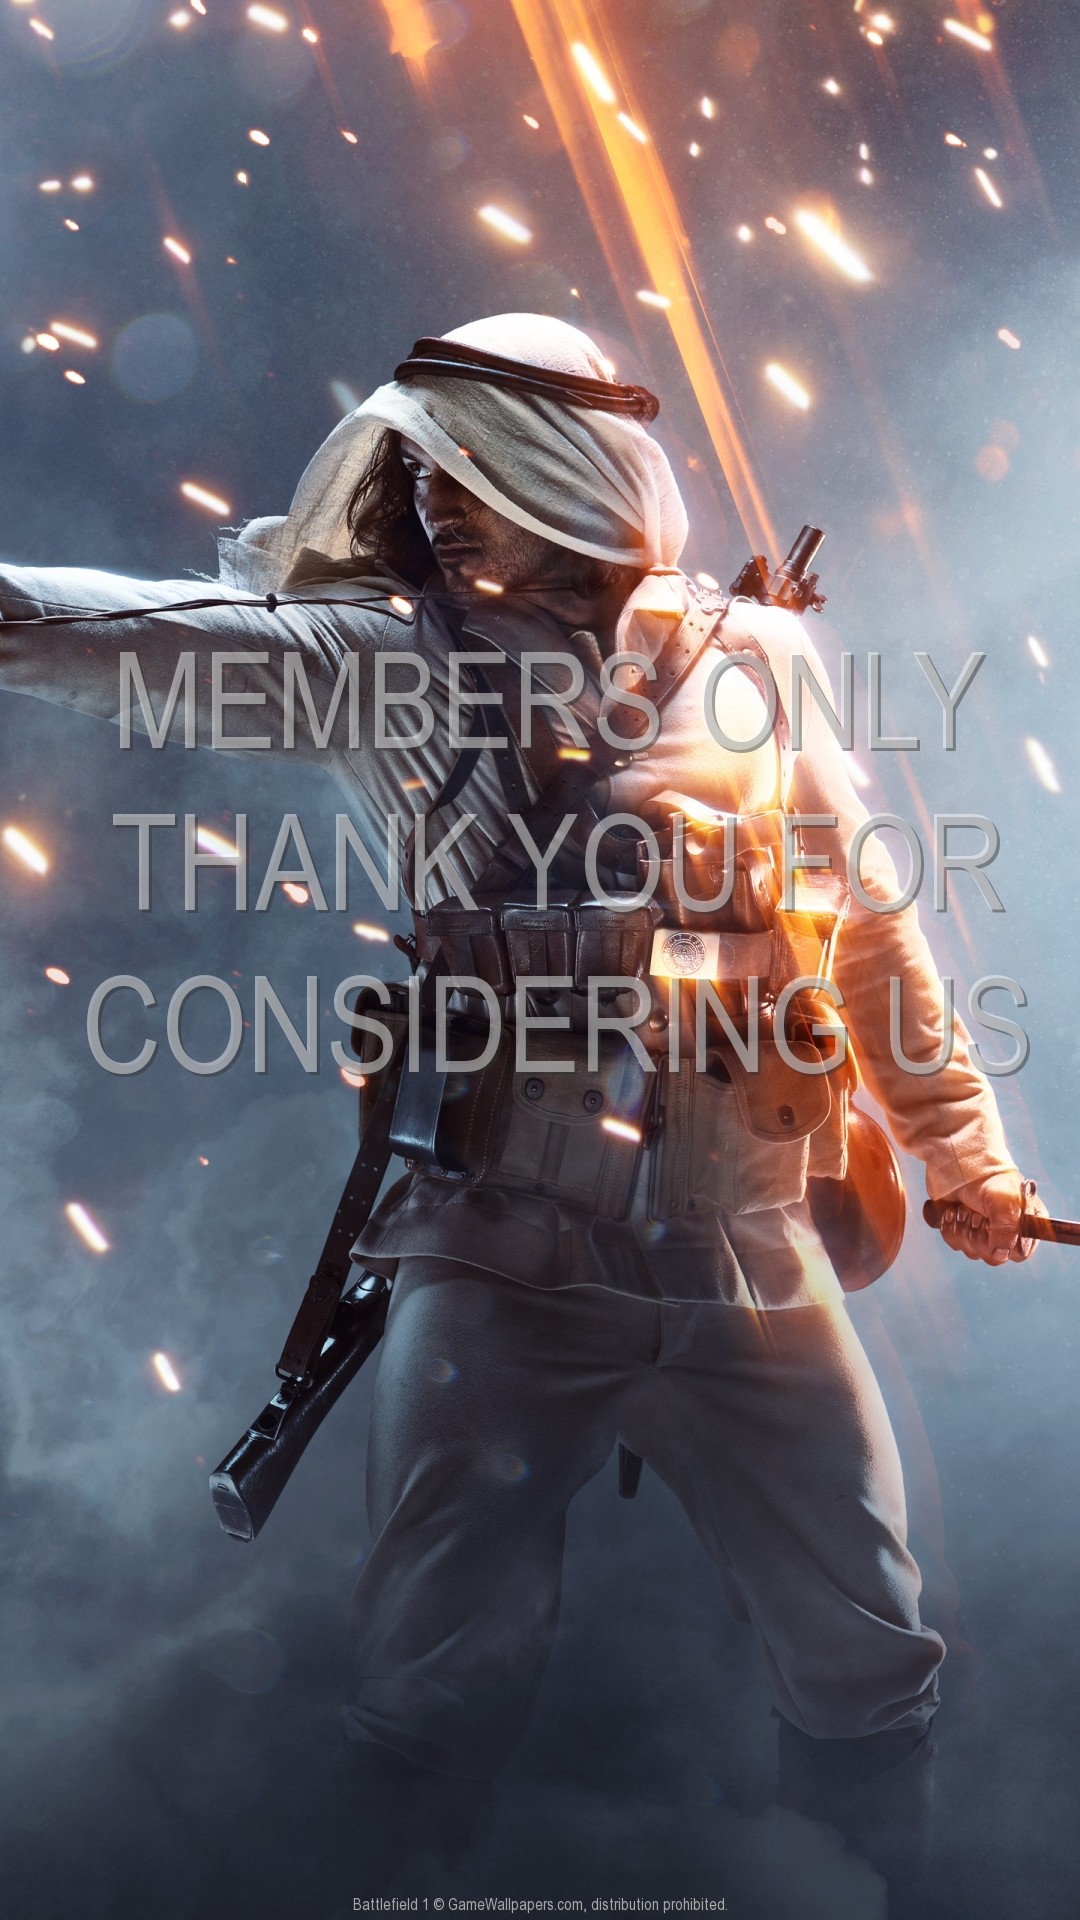 1080x1920 Battlefield 1 1920x1080 Mobile wallpaper or background 04